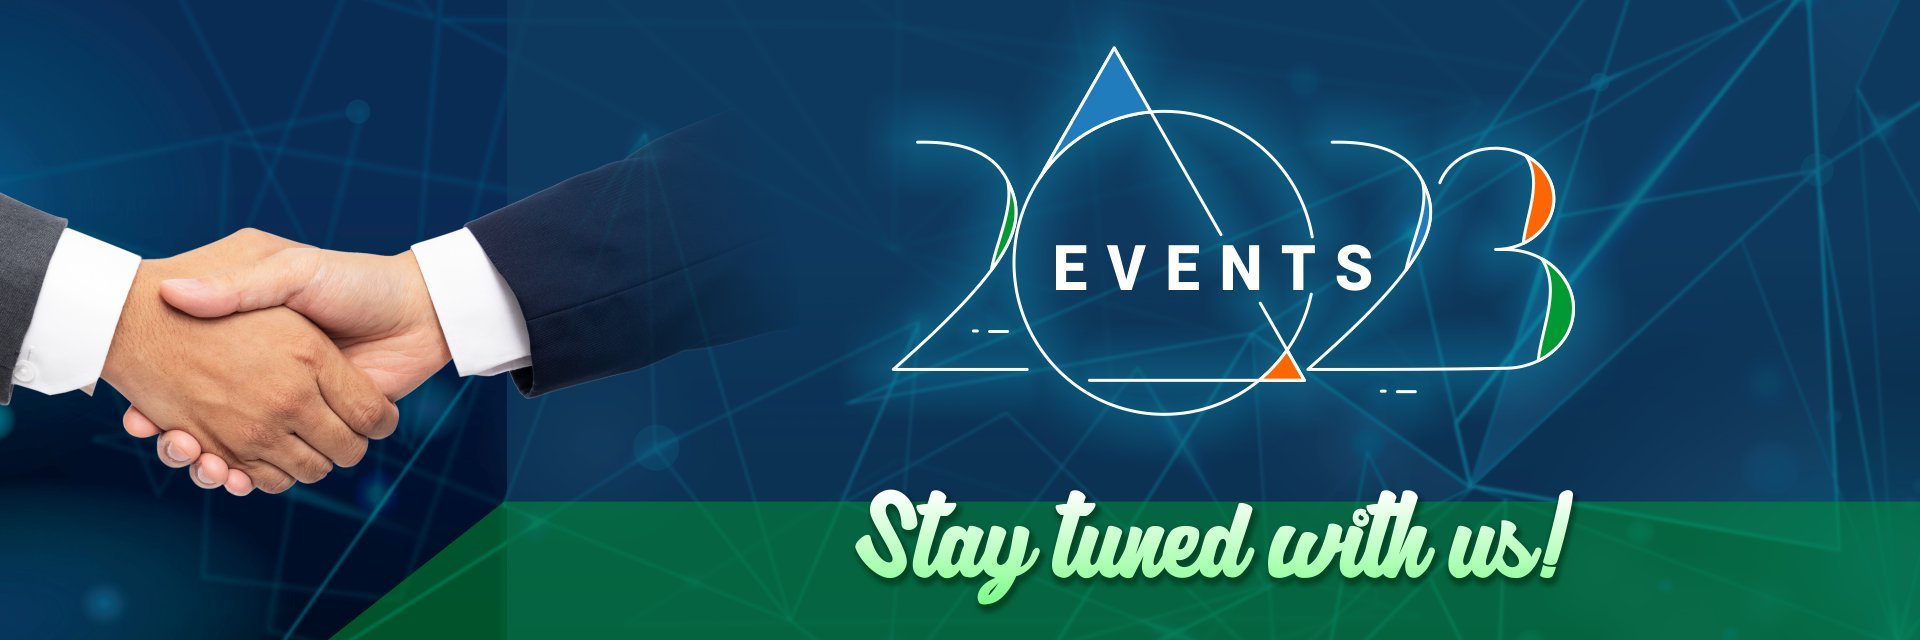 India-Event-Banner